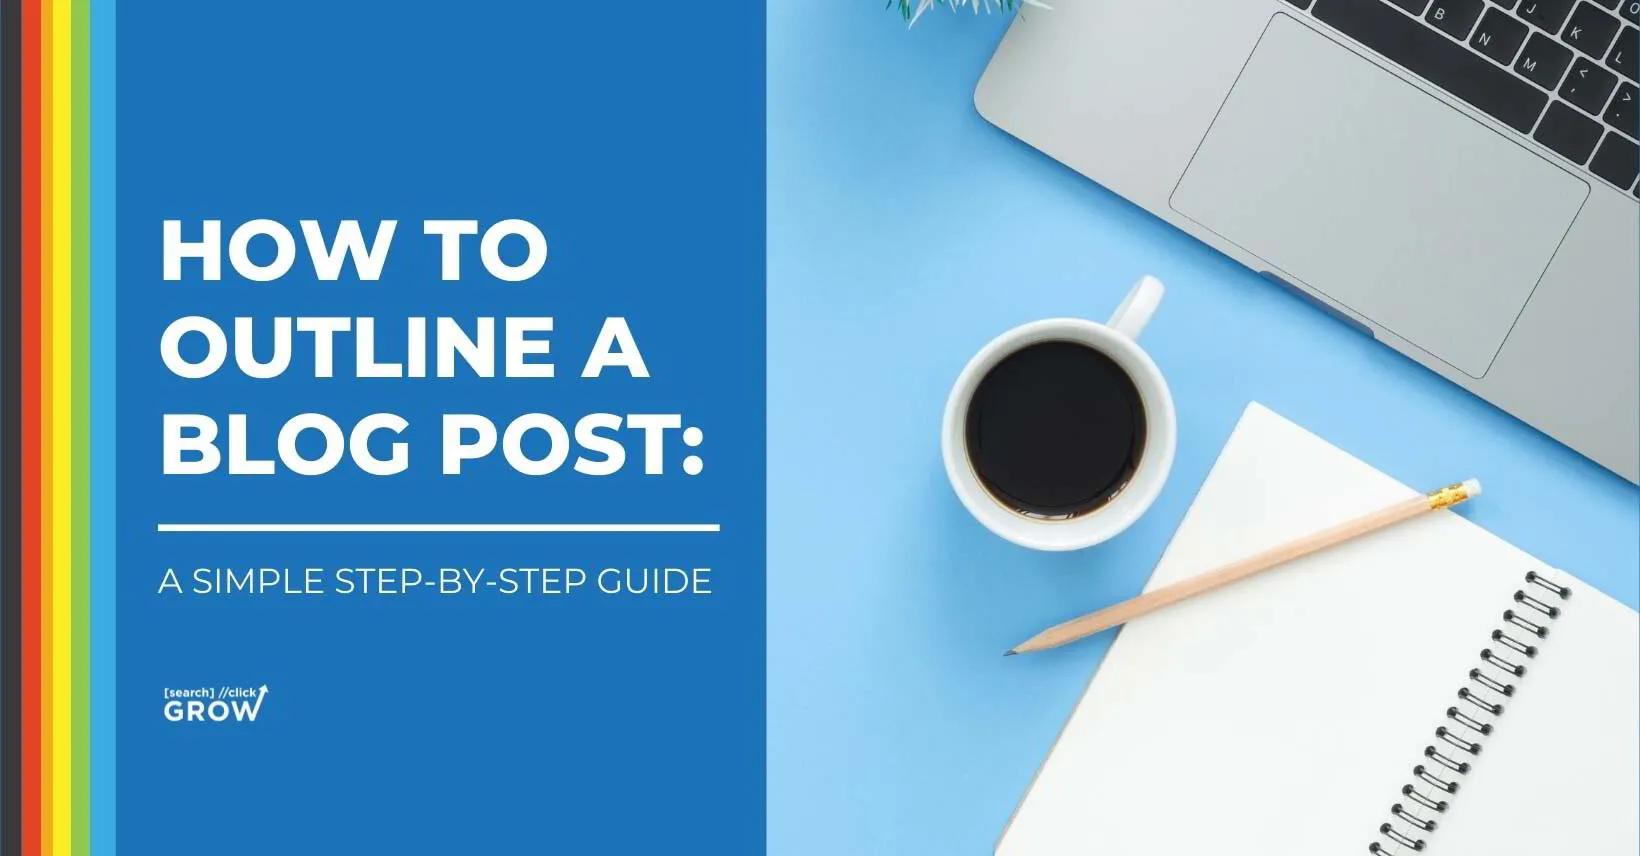 How to Outline a Blog Post: A Simple Step-by-Step Guide